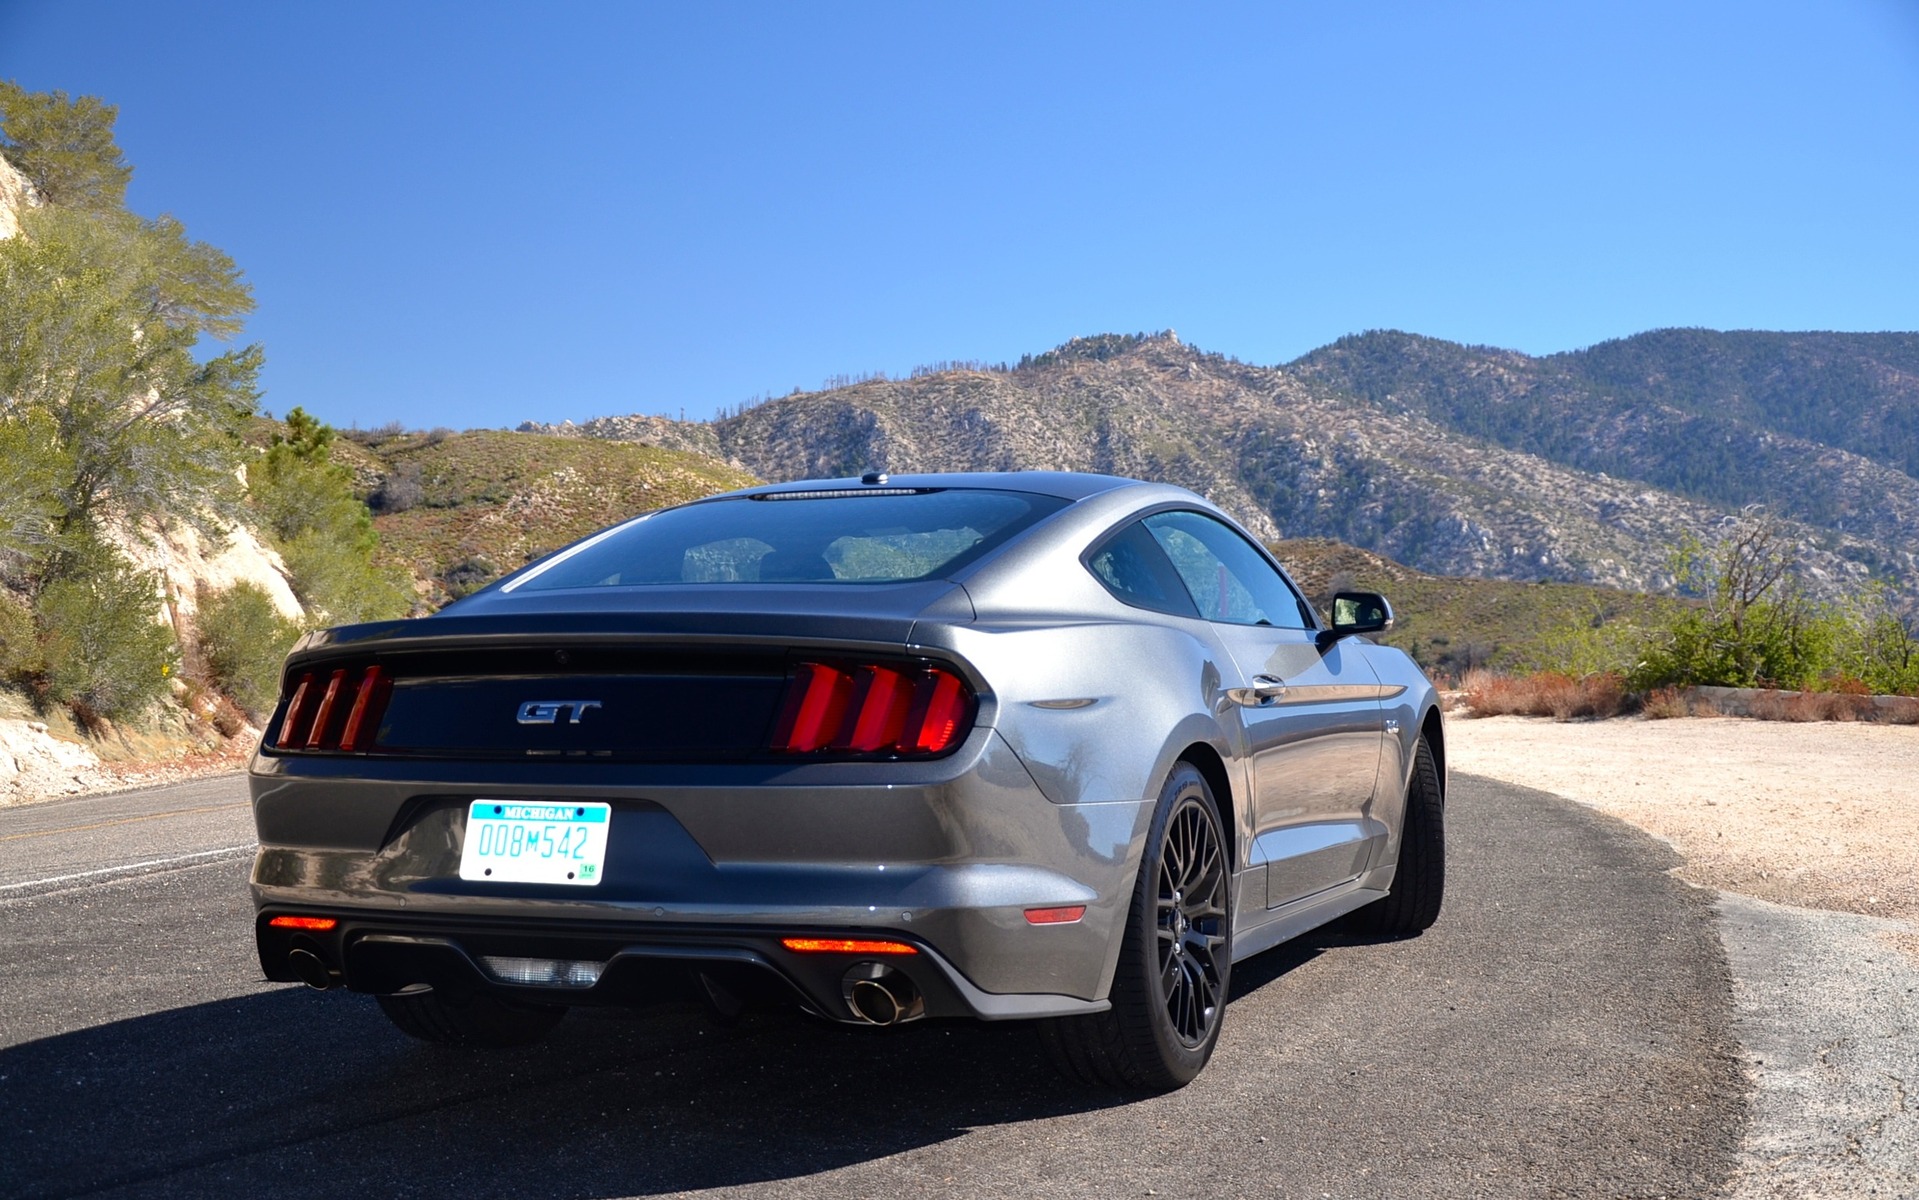 2015 Ford Mustang GT Coupe